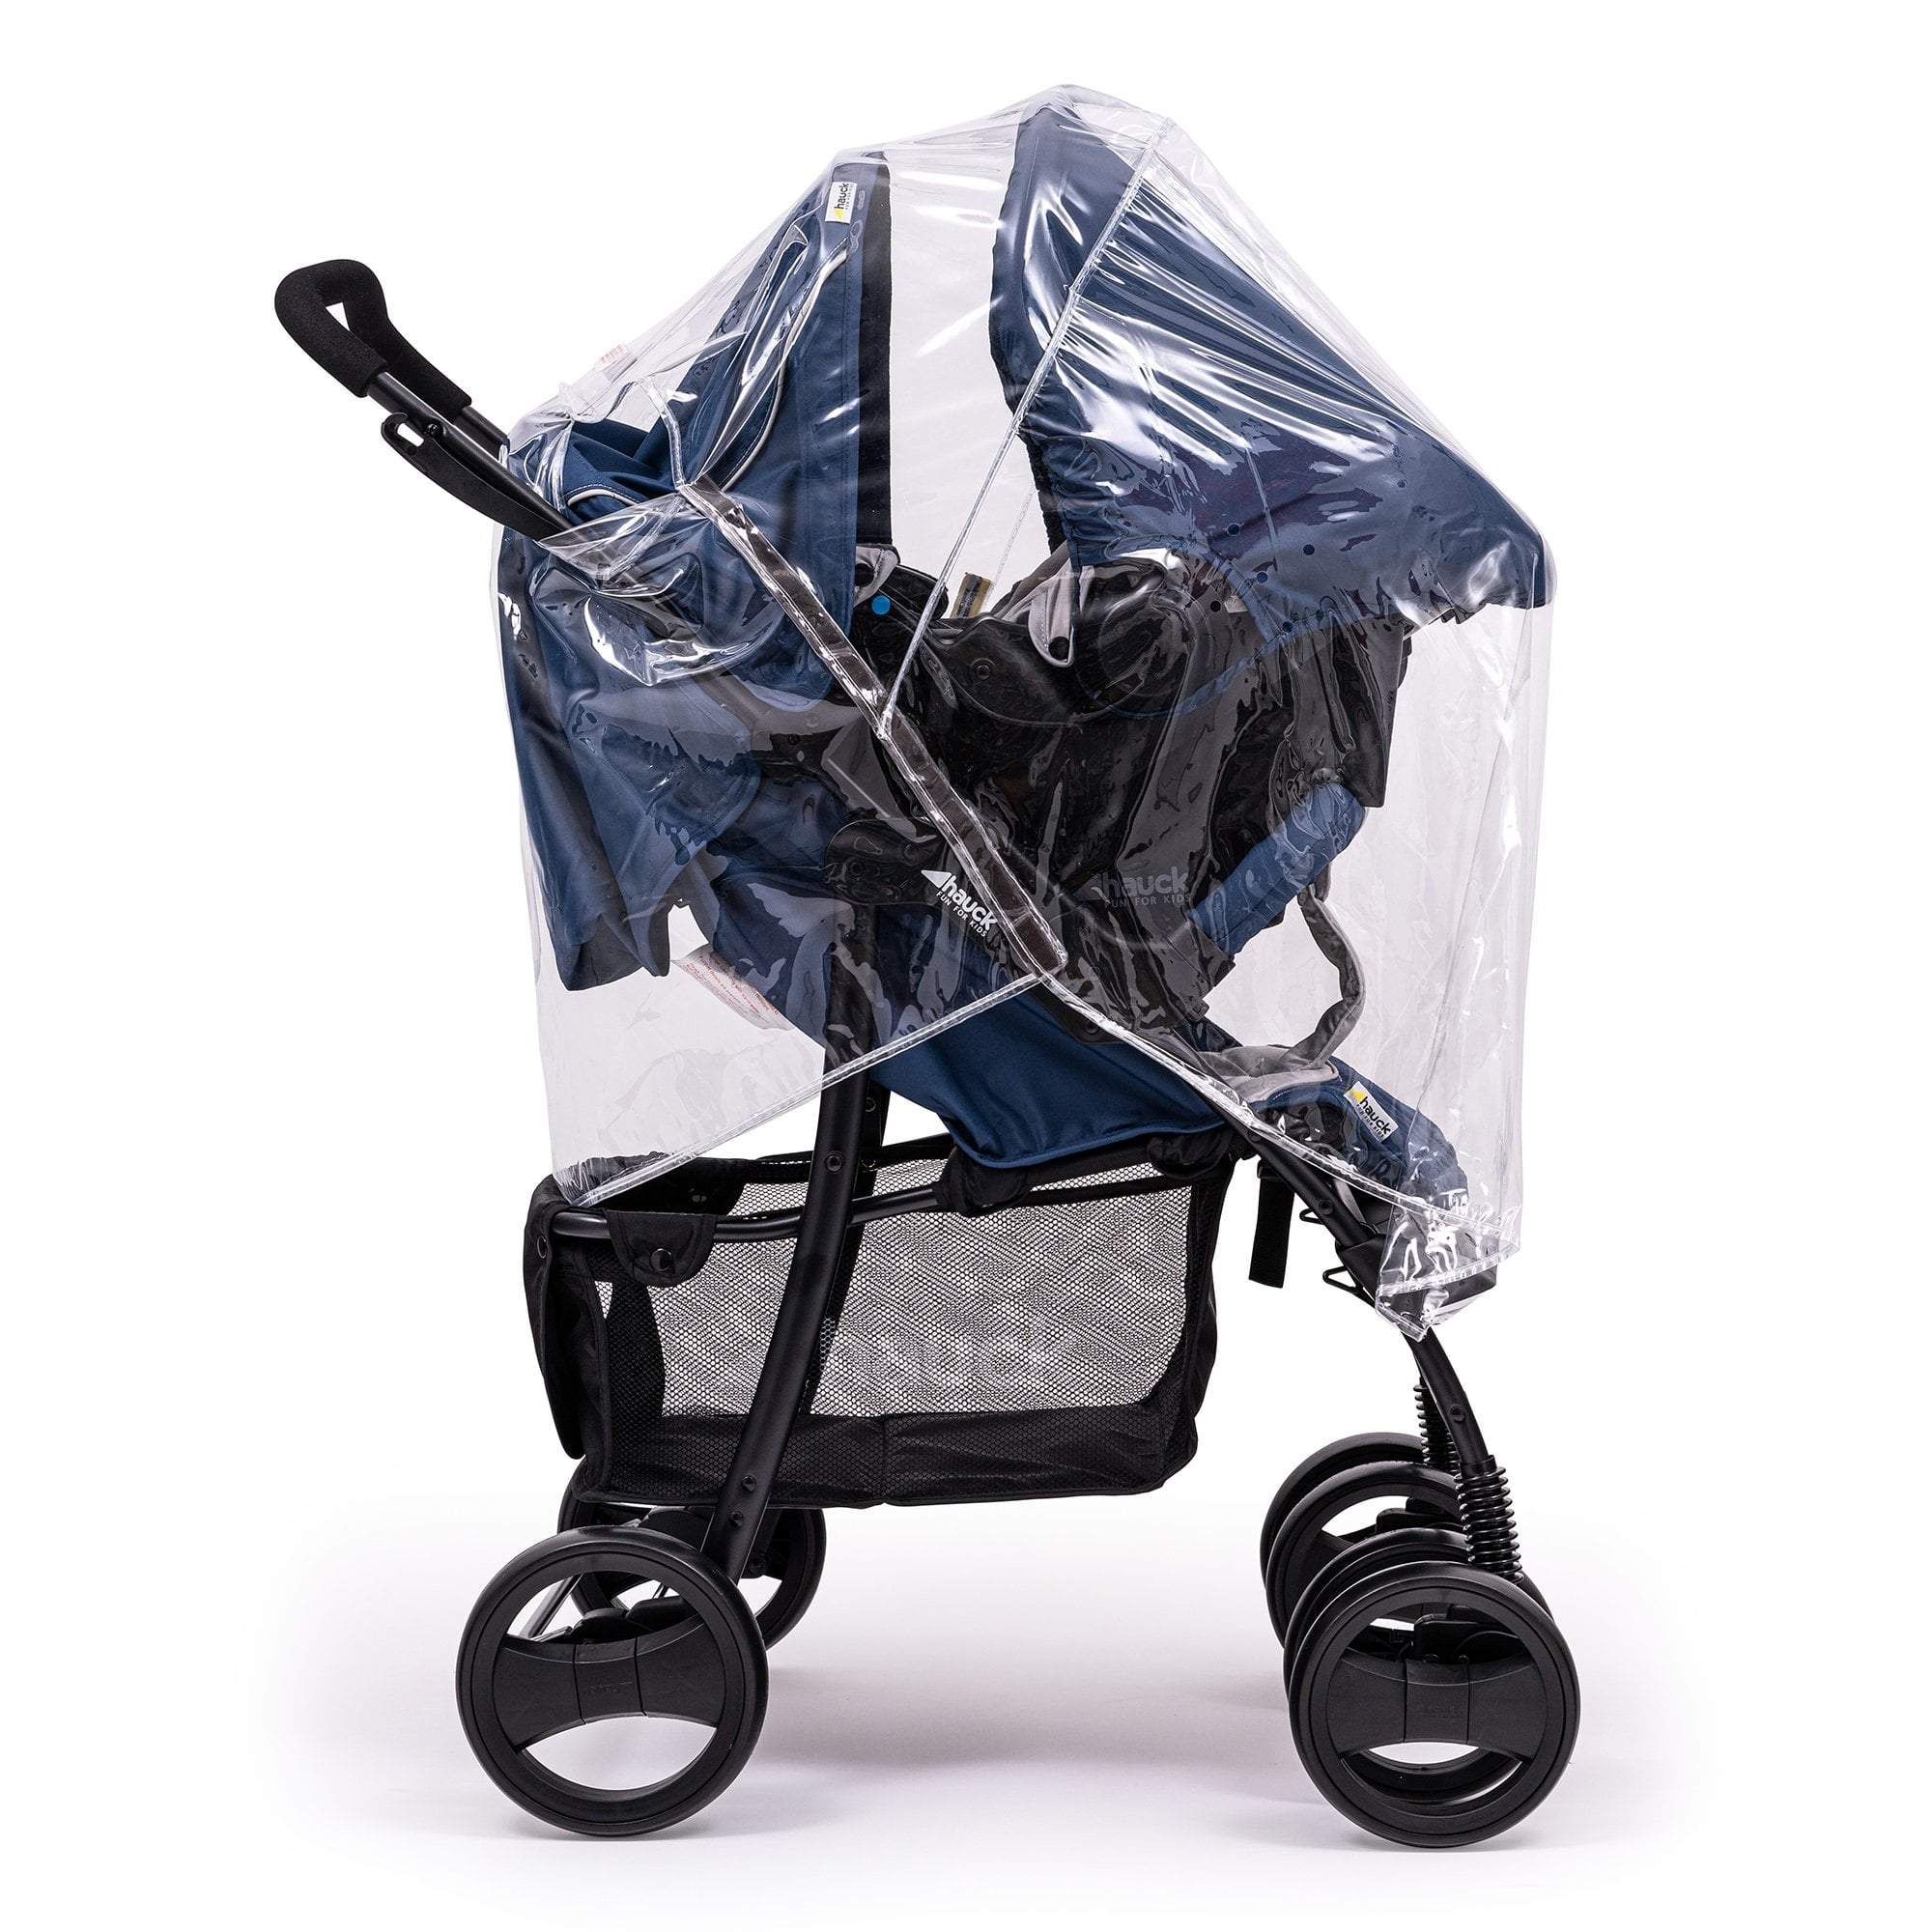 Travel System Raincover Compatible with Emmaljunga - Fits All Models - For Your Little One